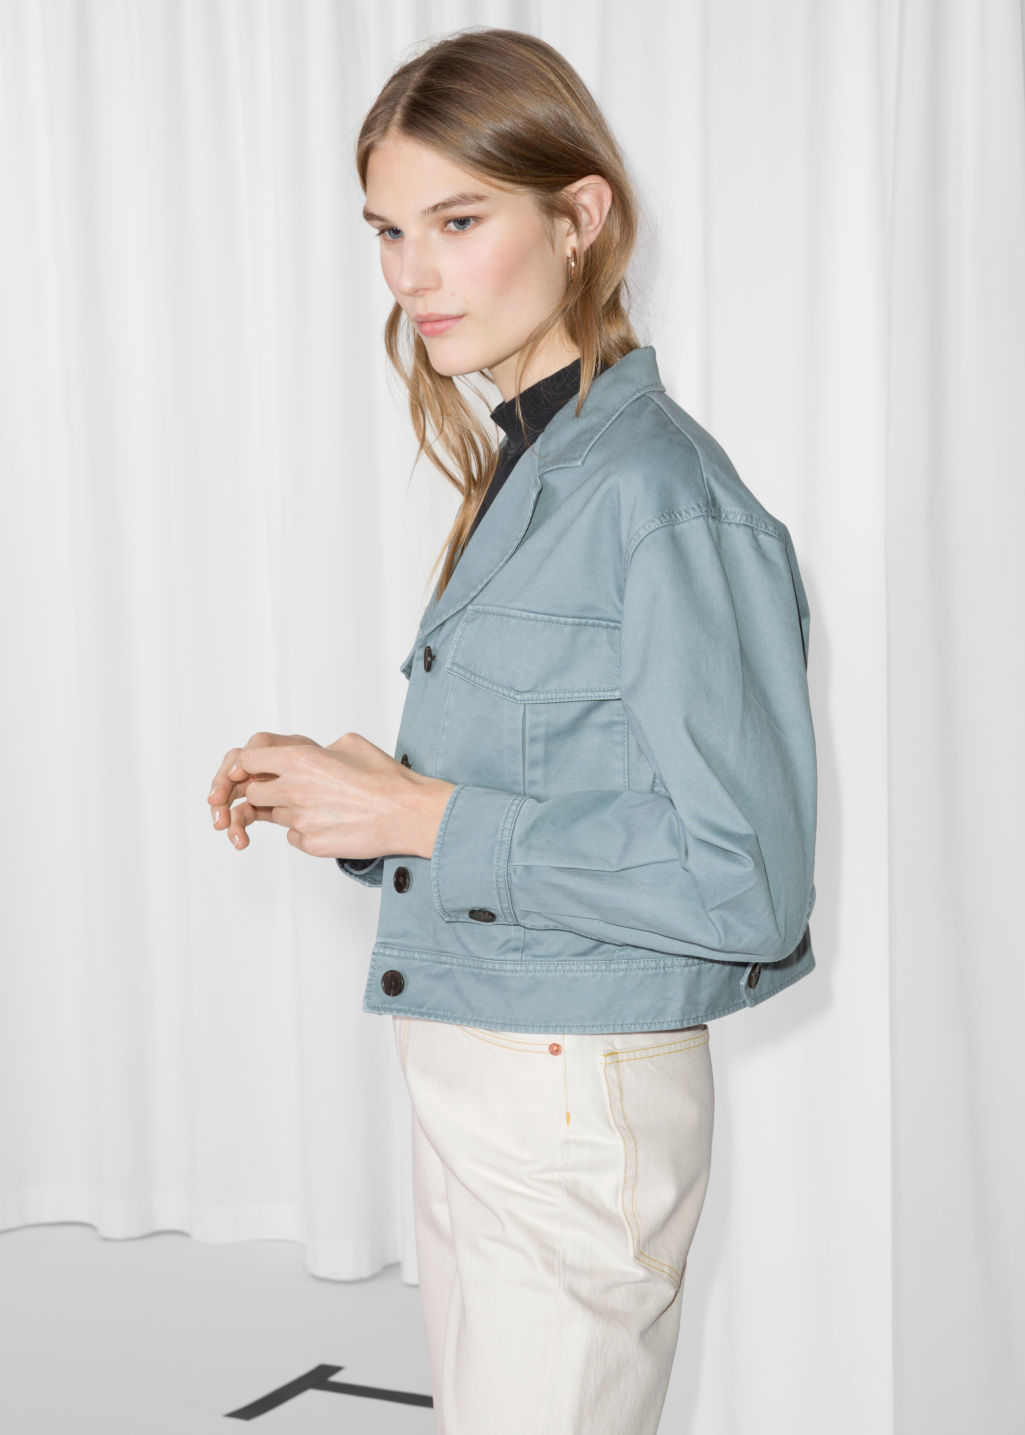 Cropped Utilitarian Jacket by & Other Stories $115